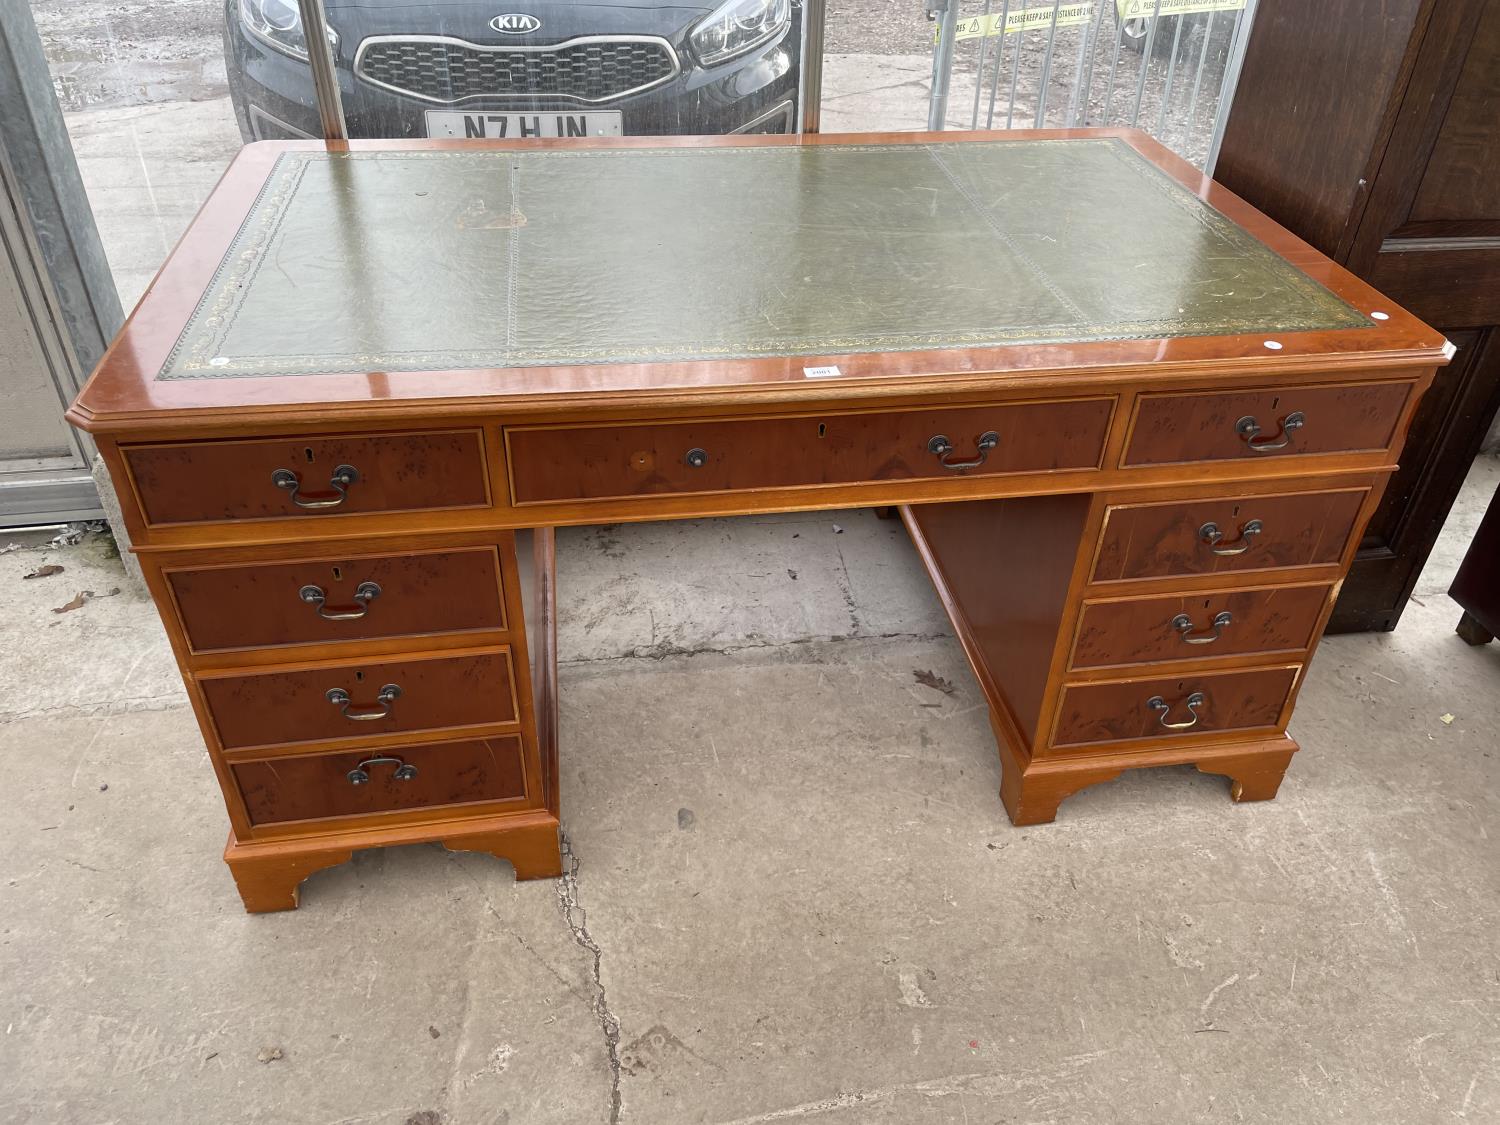 A REPRODUCTION YEW WOOD TWIN PEDESTAL DESK ENCLOSING NINE DRAWERS WITH INSET LEATHER TOP 60" X 36"